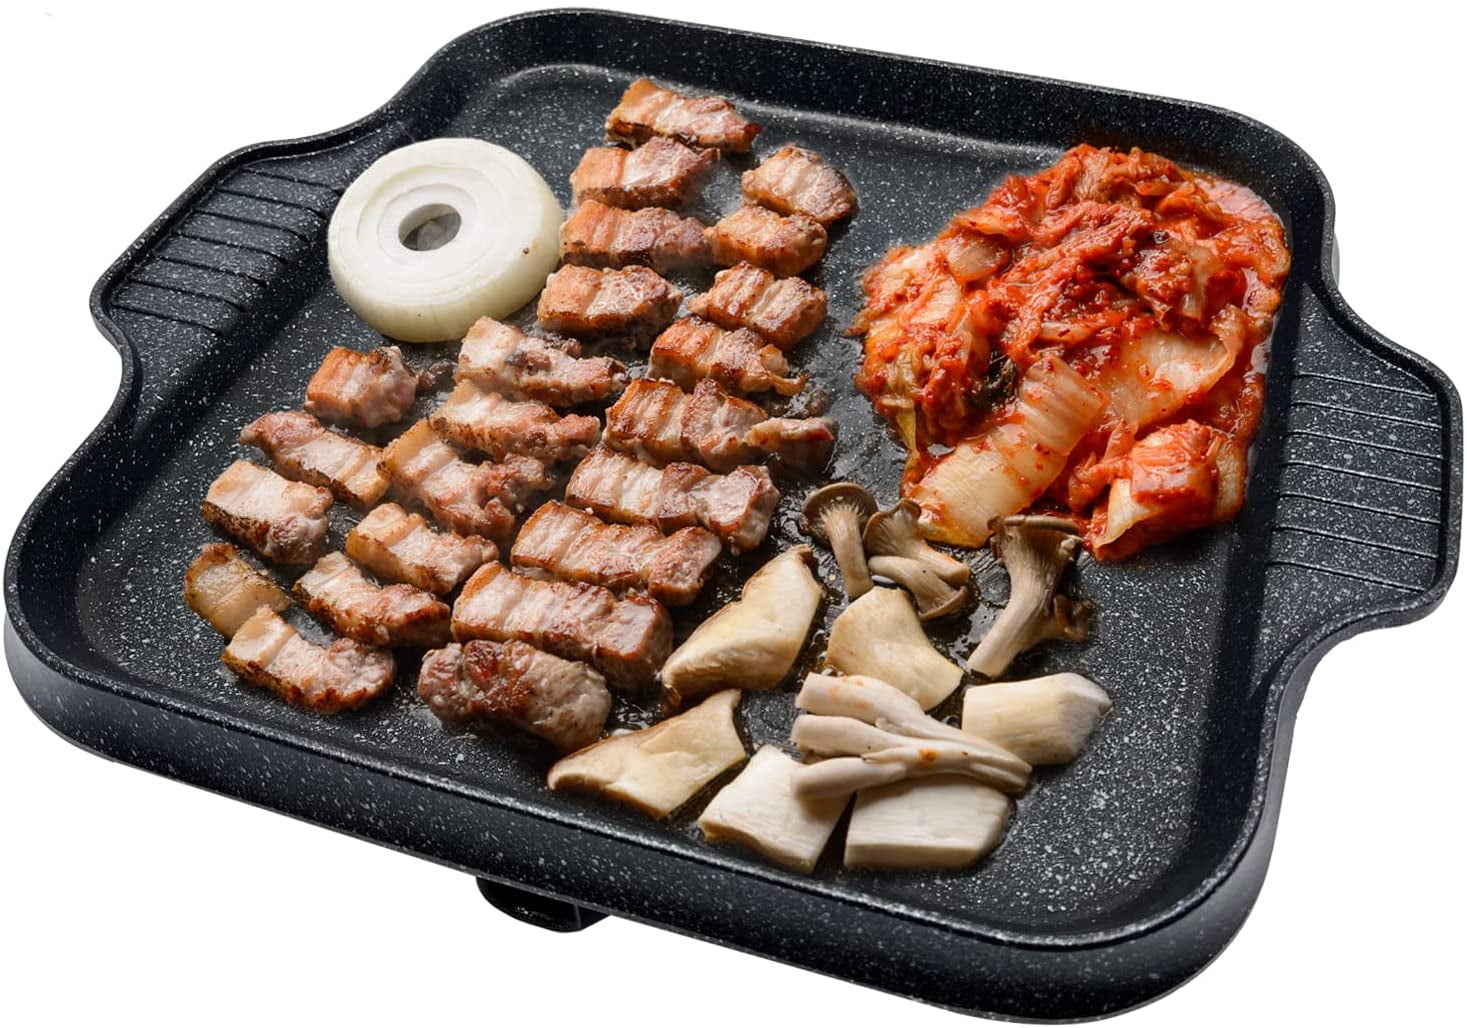  COOKKING - Master Grill Pan, Korean Traditional BBQ